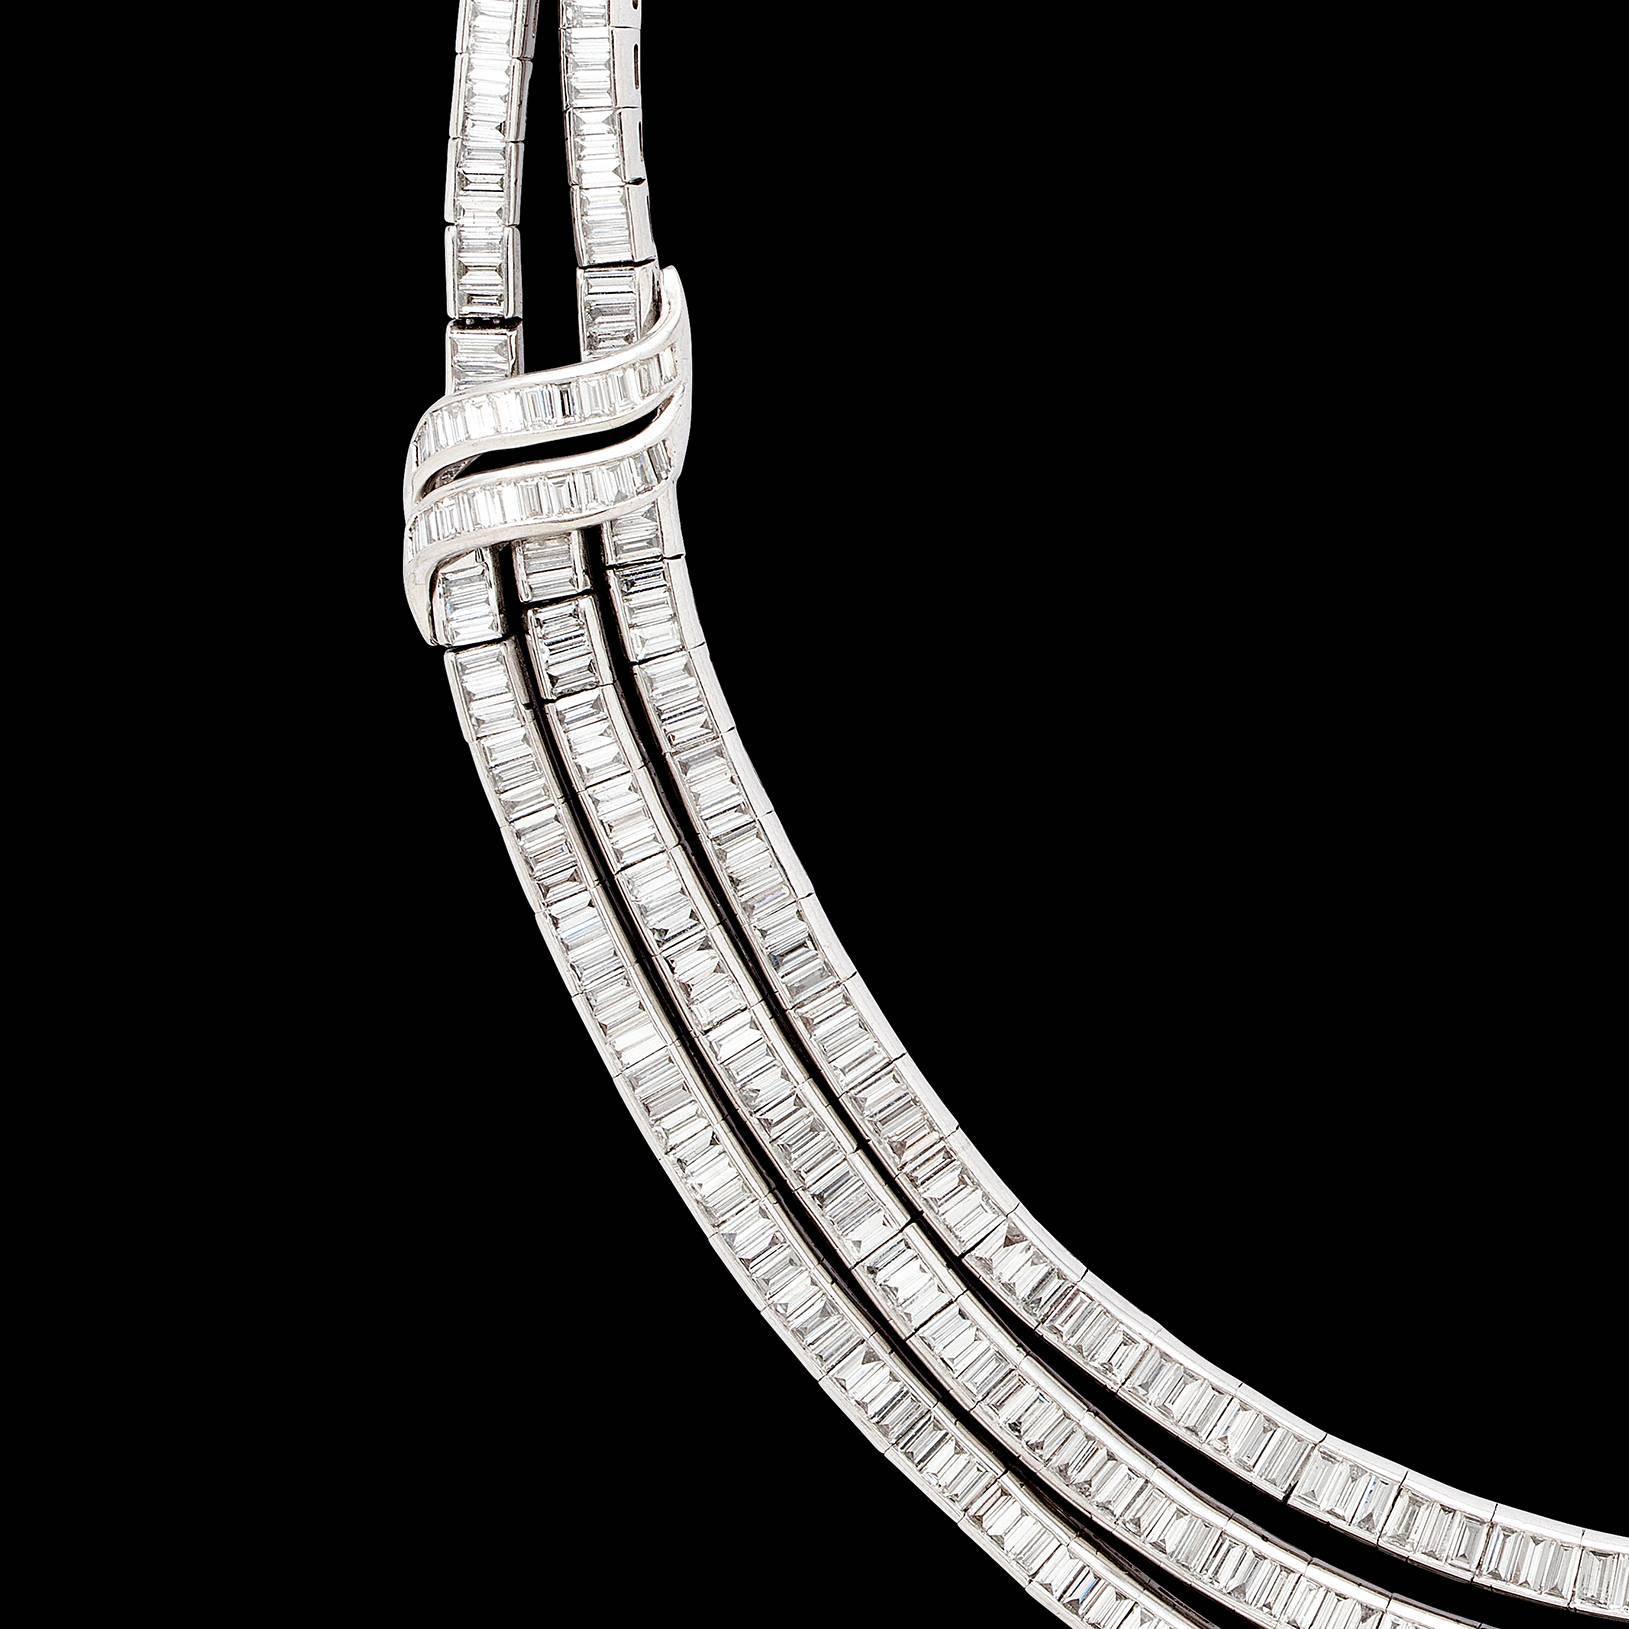 From a classic 1950's design, the Sophia D. platinum triple-swag diamond necklace is set throughout with baguette-cut diamonds, weighing in total an estimated 22.0 carats. The necklace measures 16 inches and weighs 90.0 grams. Cool elegance at it's